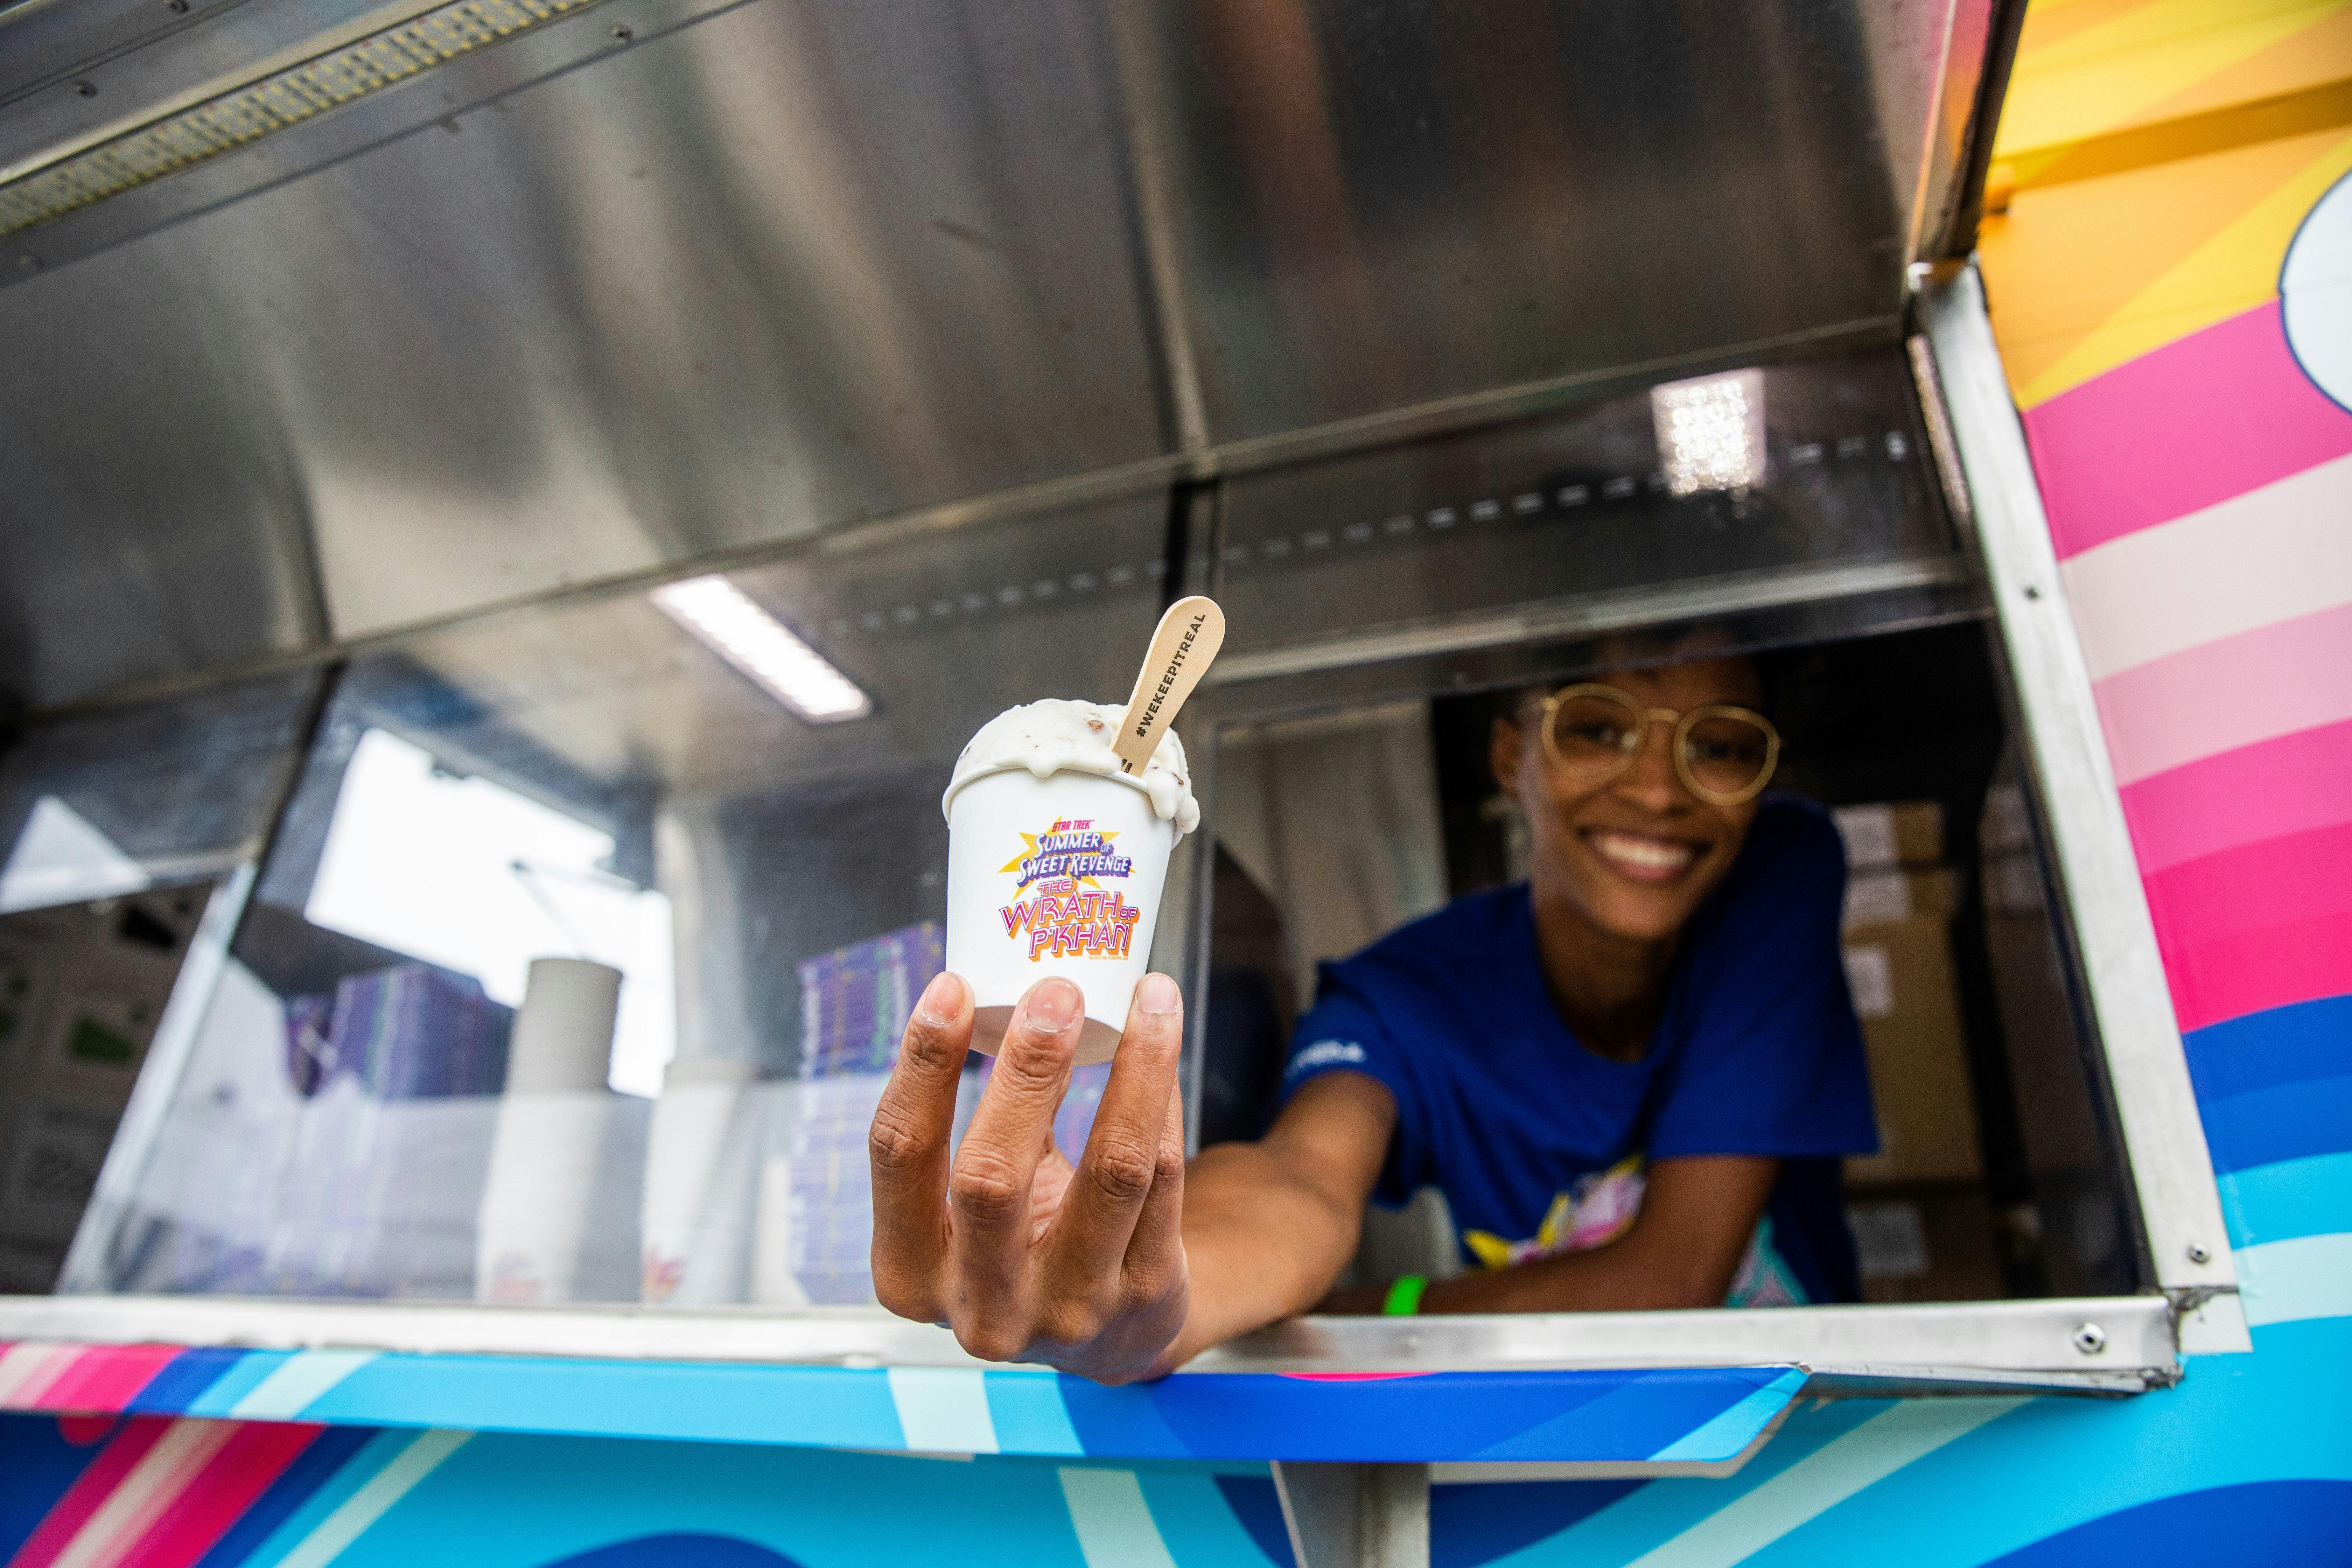 A smiling worker holds an ice cream cup towards the camera.